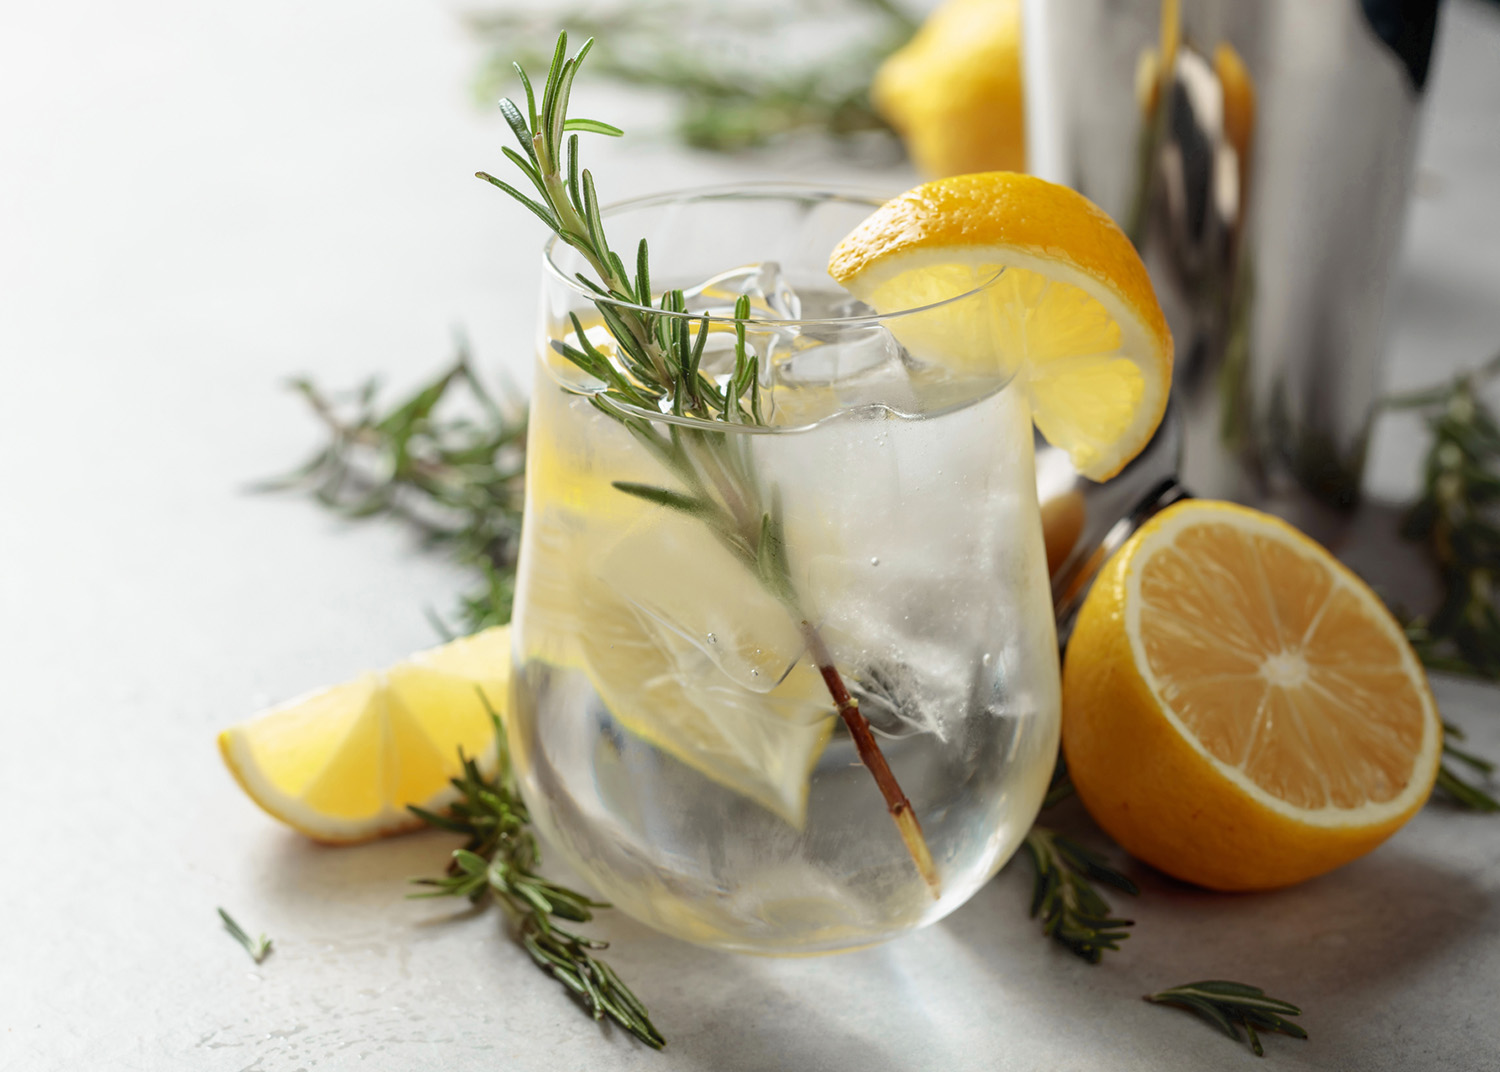 Refreshing drink with natural ice, lemon, and rosemary in a frozen glass. Copy space.